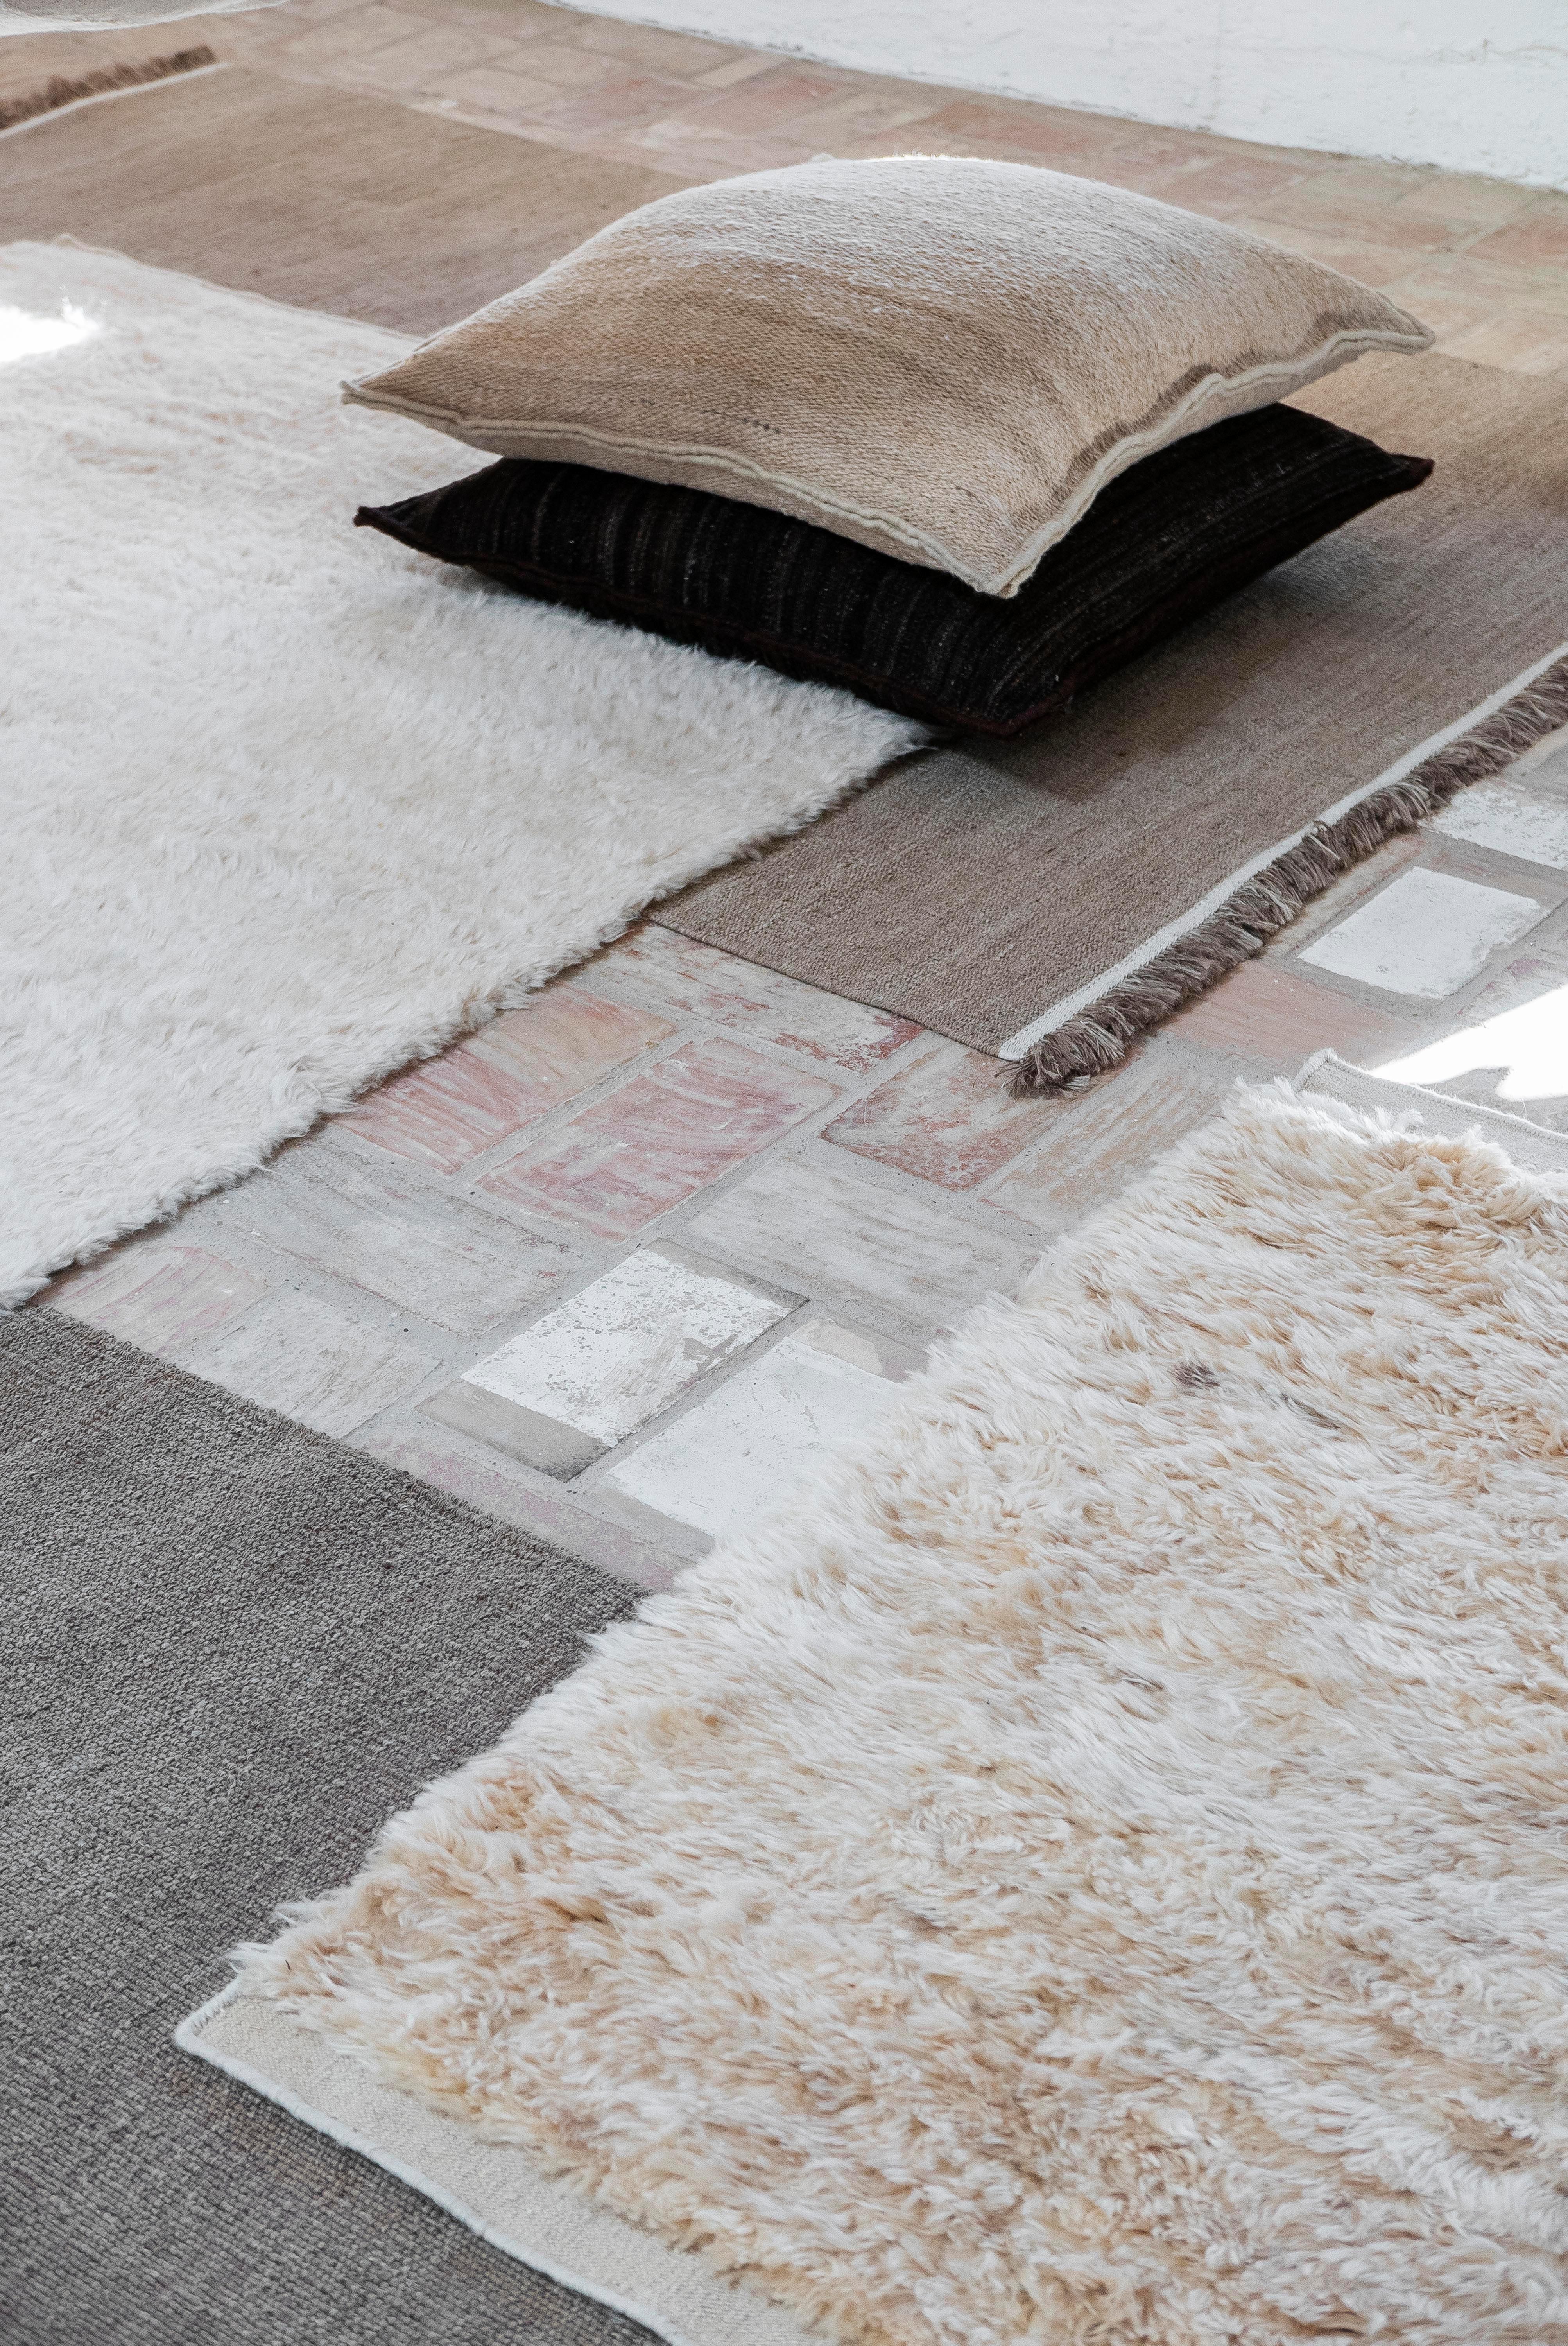 Large Hand-Knotted 'Wellbeing' Wool Chobi Rug by Ilse Crawford for Nanimarquina  For Sale 1